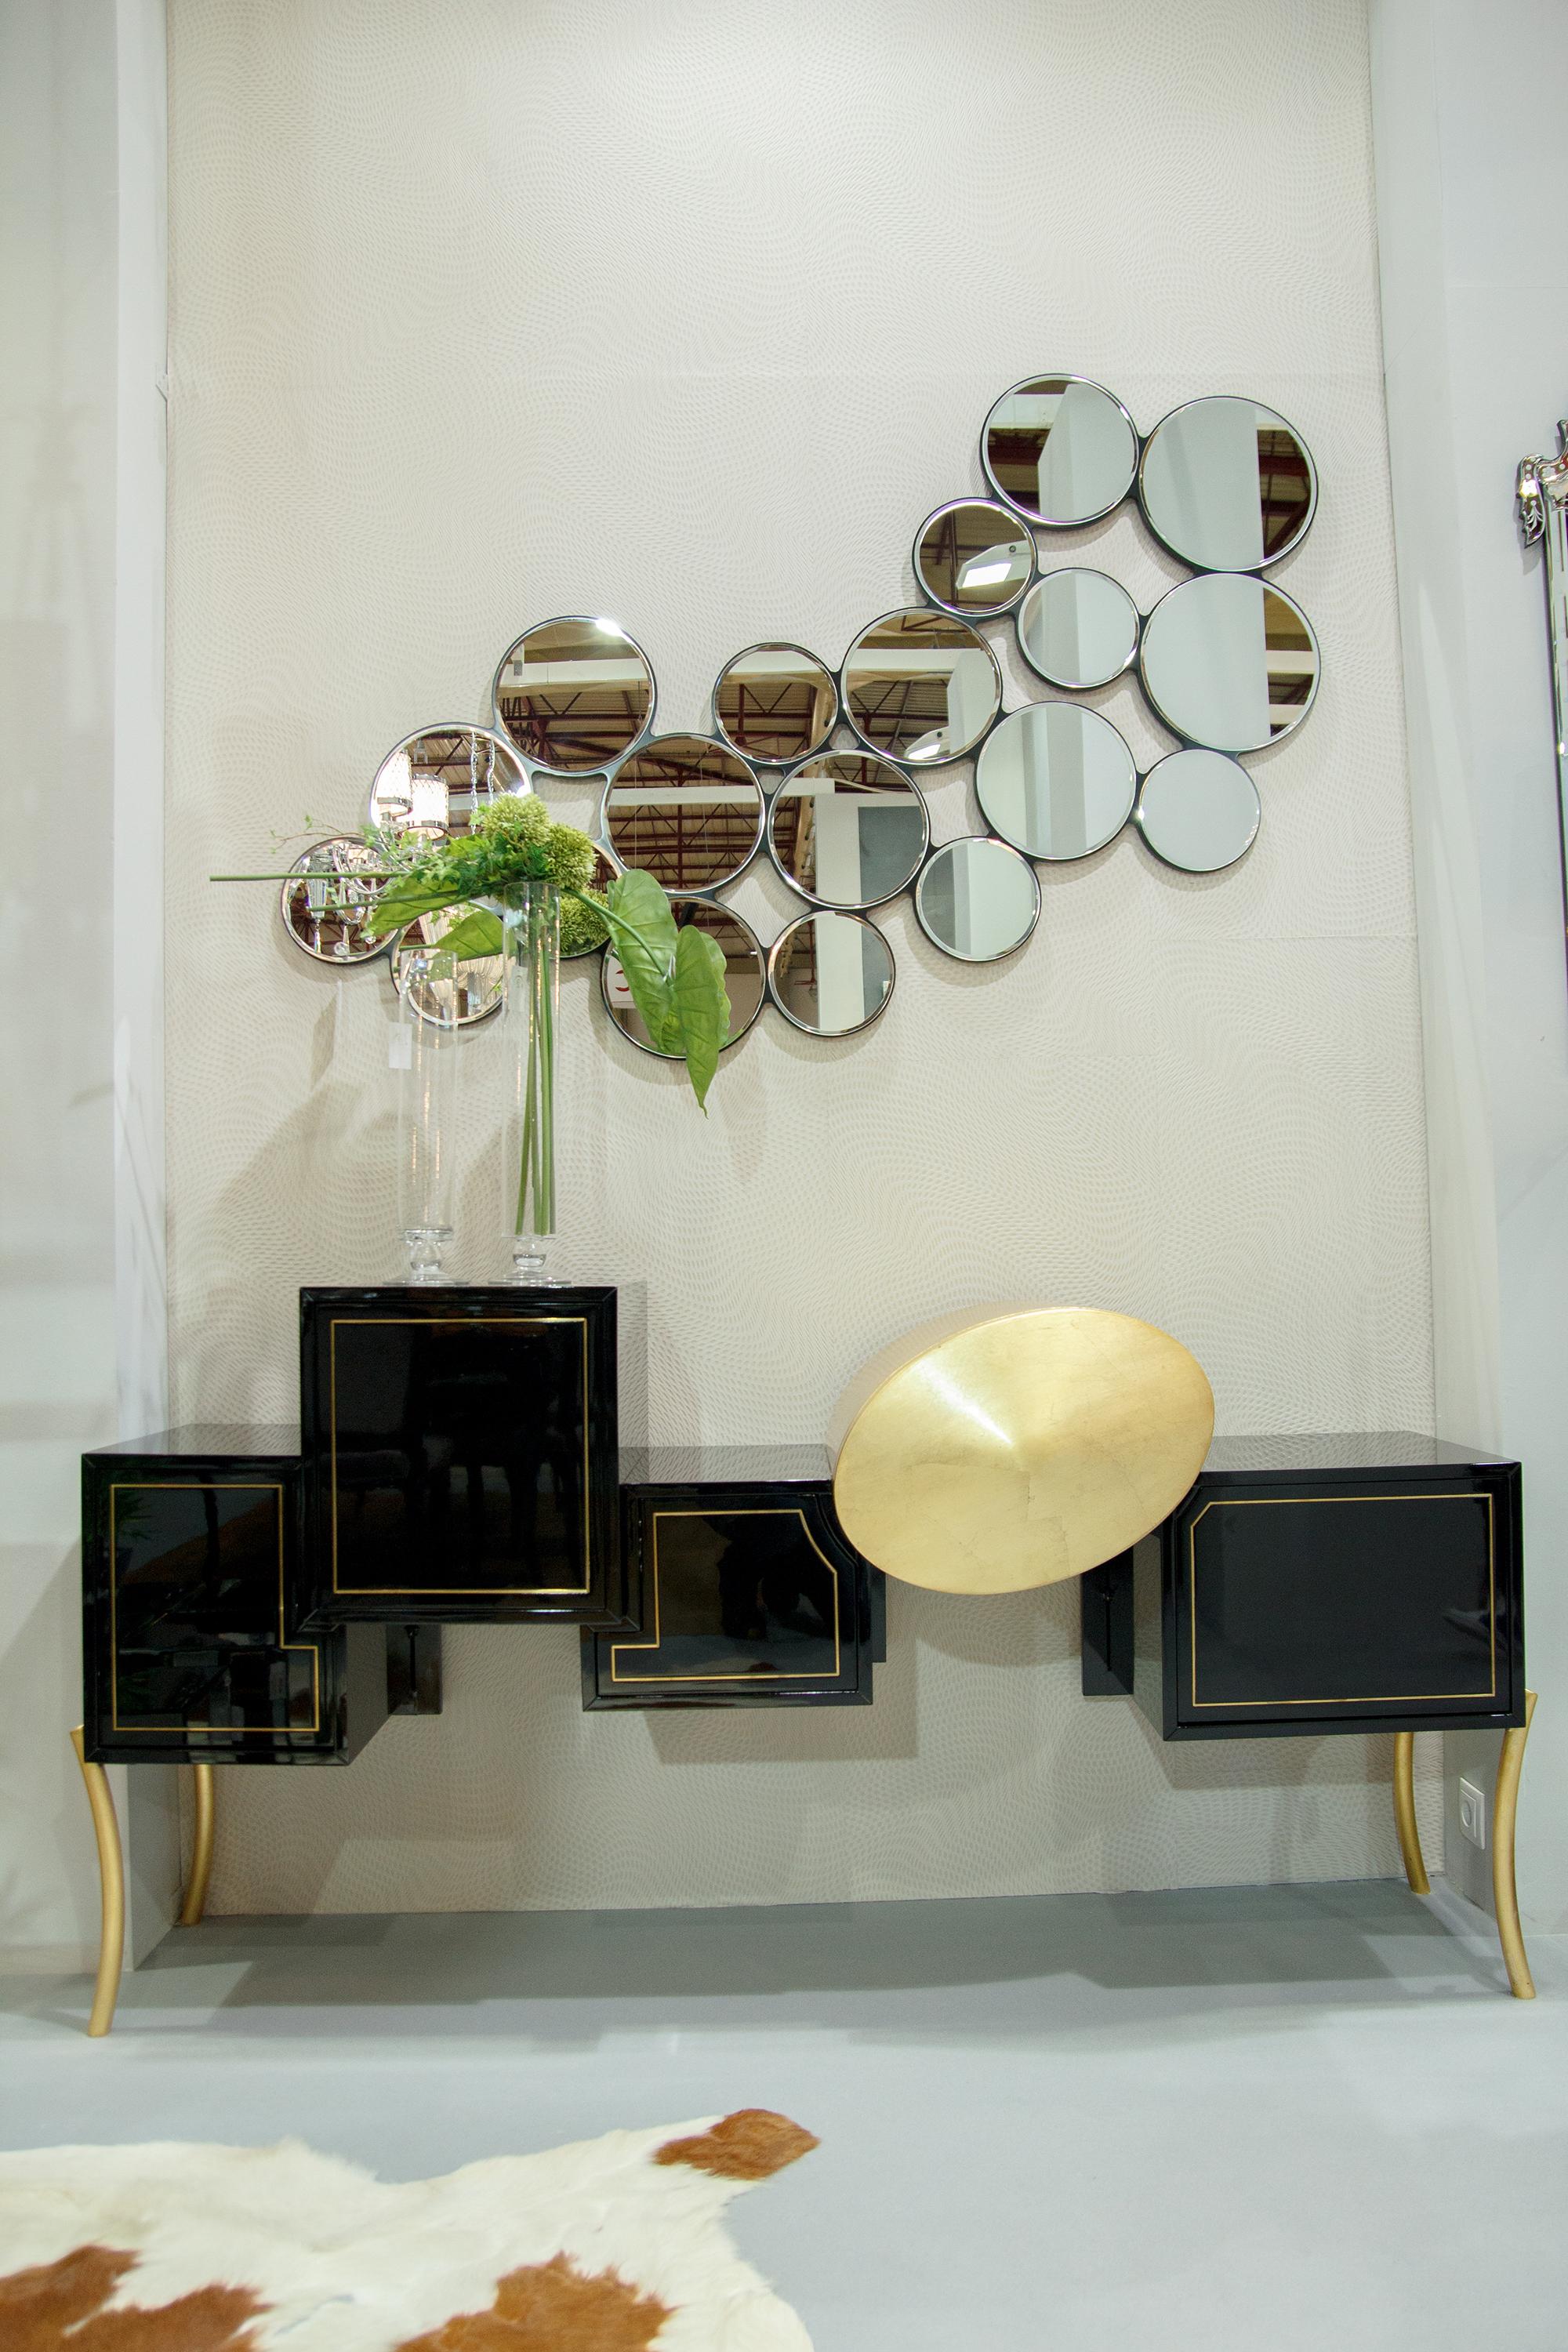 Modern Bubbles 19 Wall Mirror, Contemporary Collection, Handcrafted in Portugal - Europe by Greenapple.

A stunning decorative wall mirror with wood base, lacquered in high gloss black combined with 19 round clear mirrors. It feels like shapes and